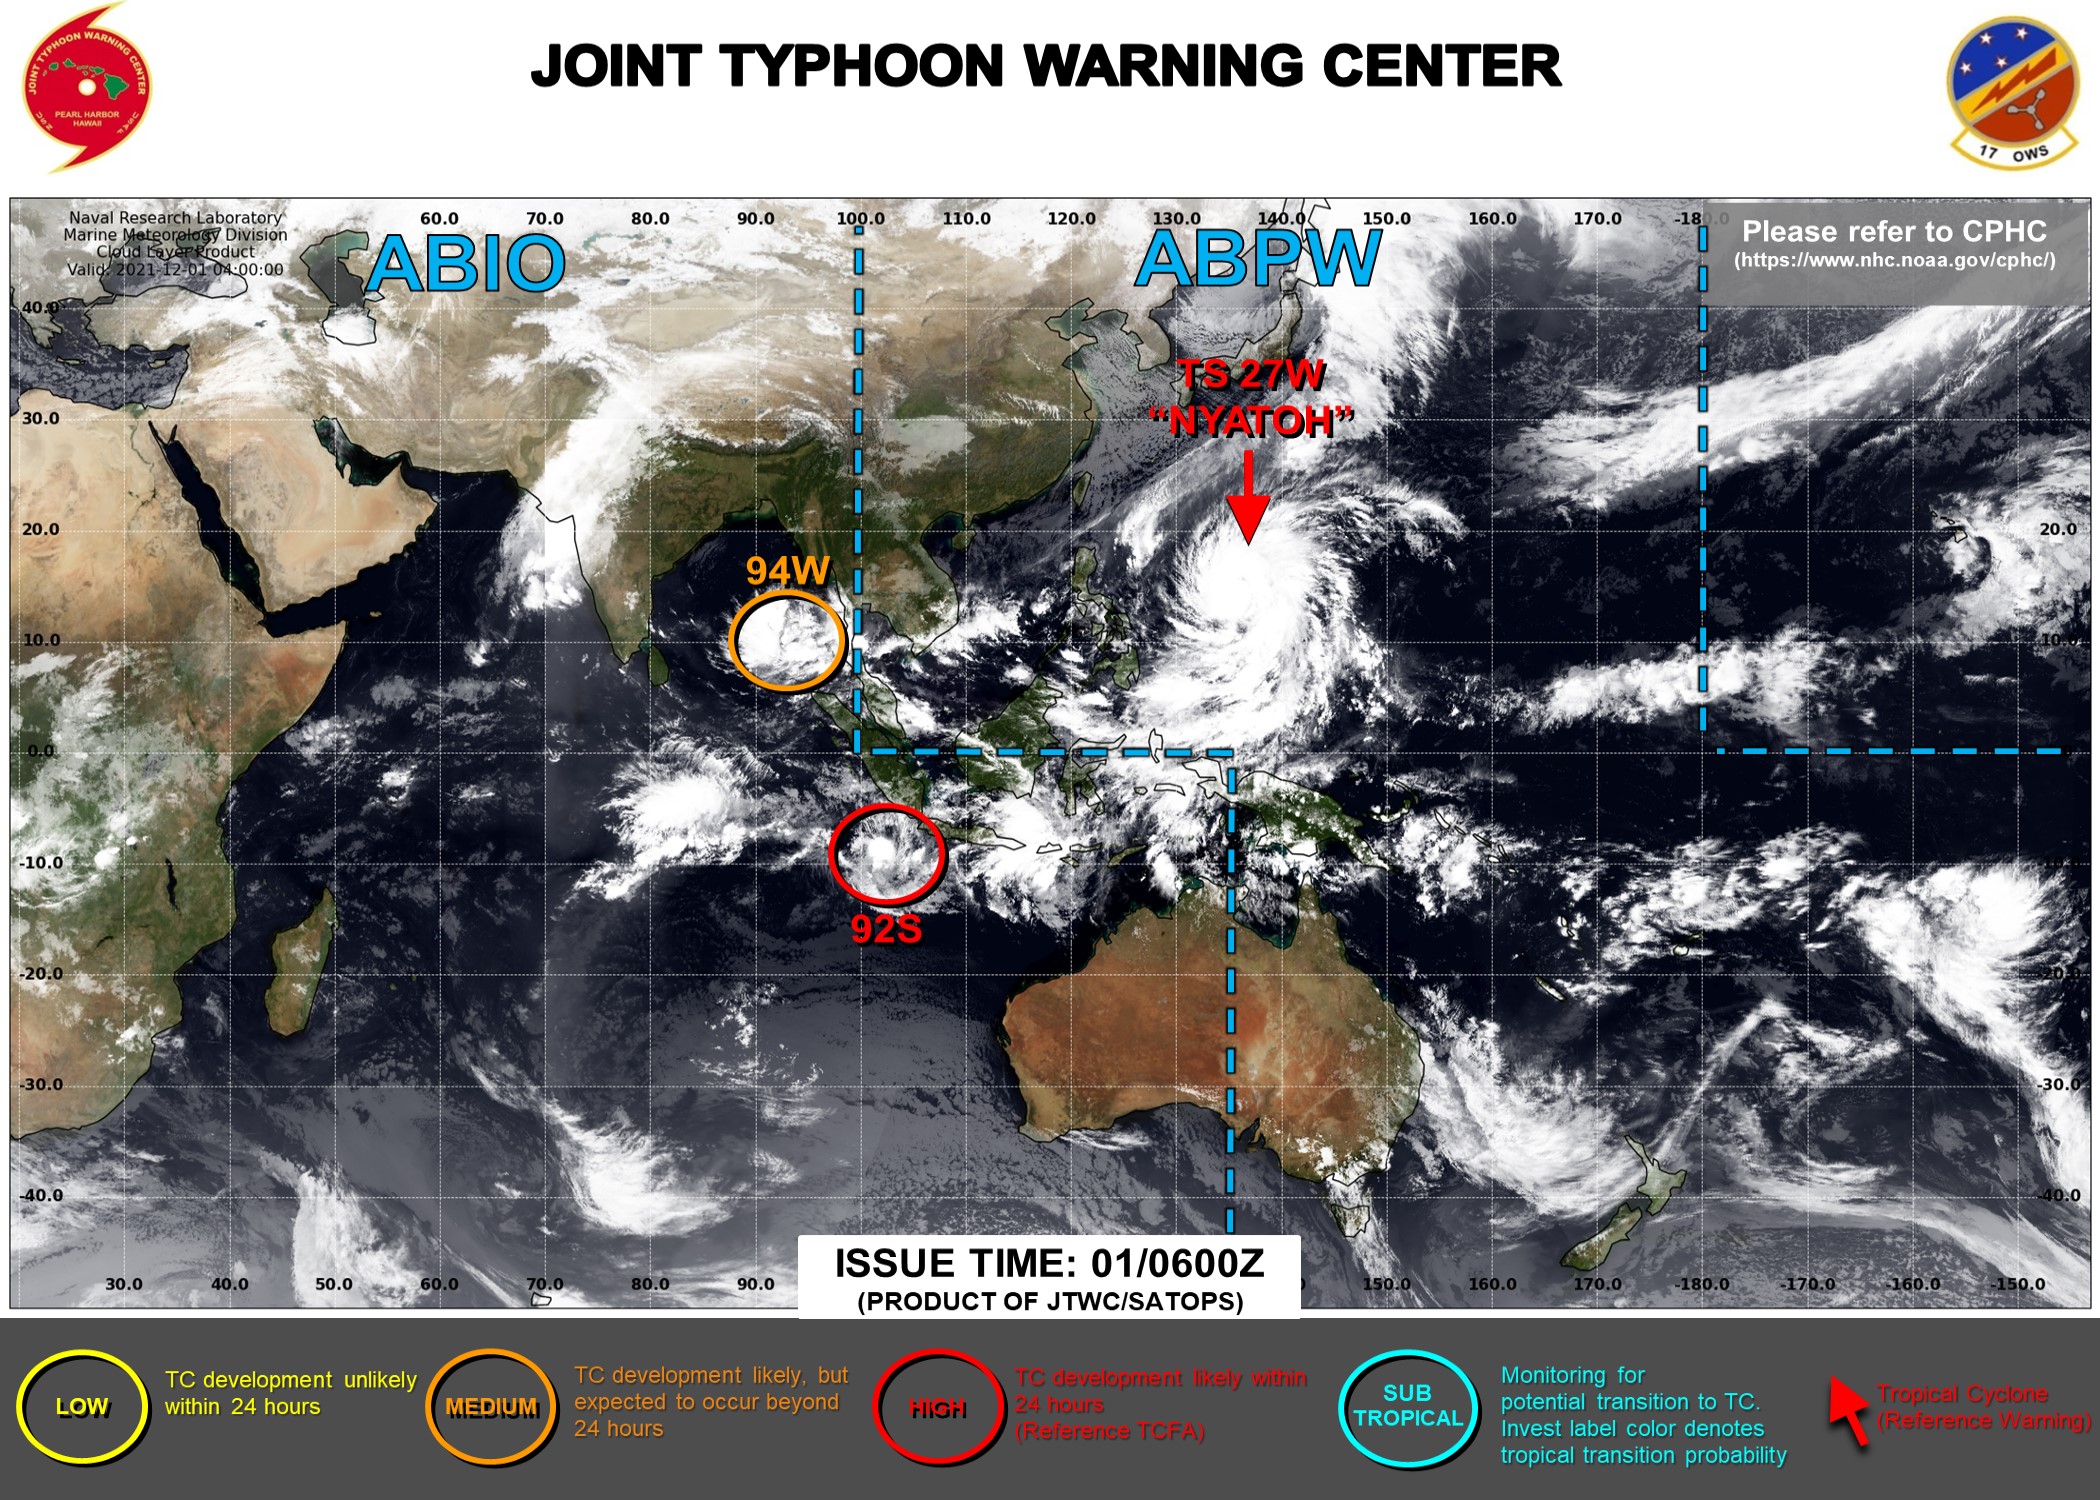 JTWC IS ISSUING 6HOURLY WARNINGS ON 27W(NYATOH). 3HOURLY SATELLITE BULLETINS ARE ISSUED FOR BOTH 27W AND INVEST 92S.